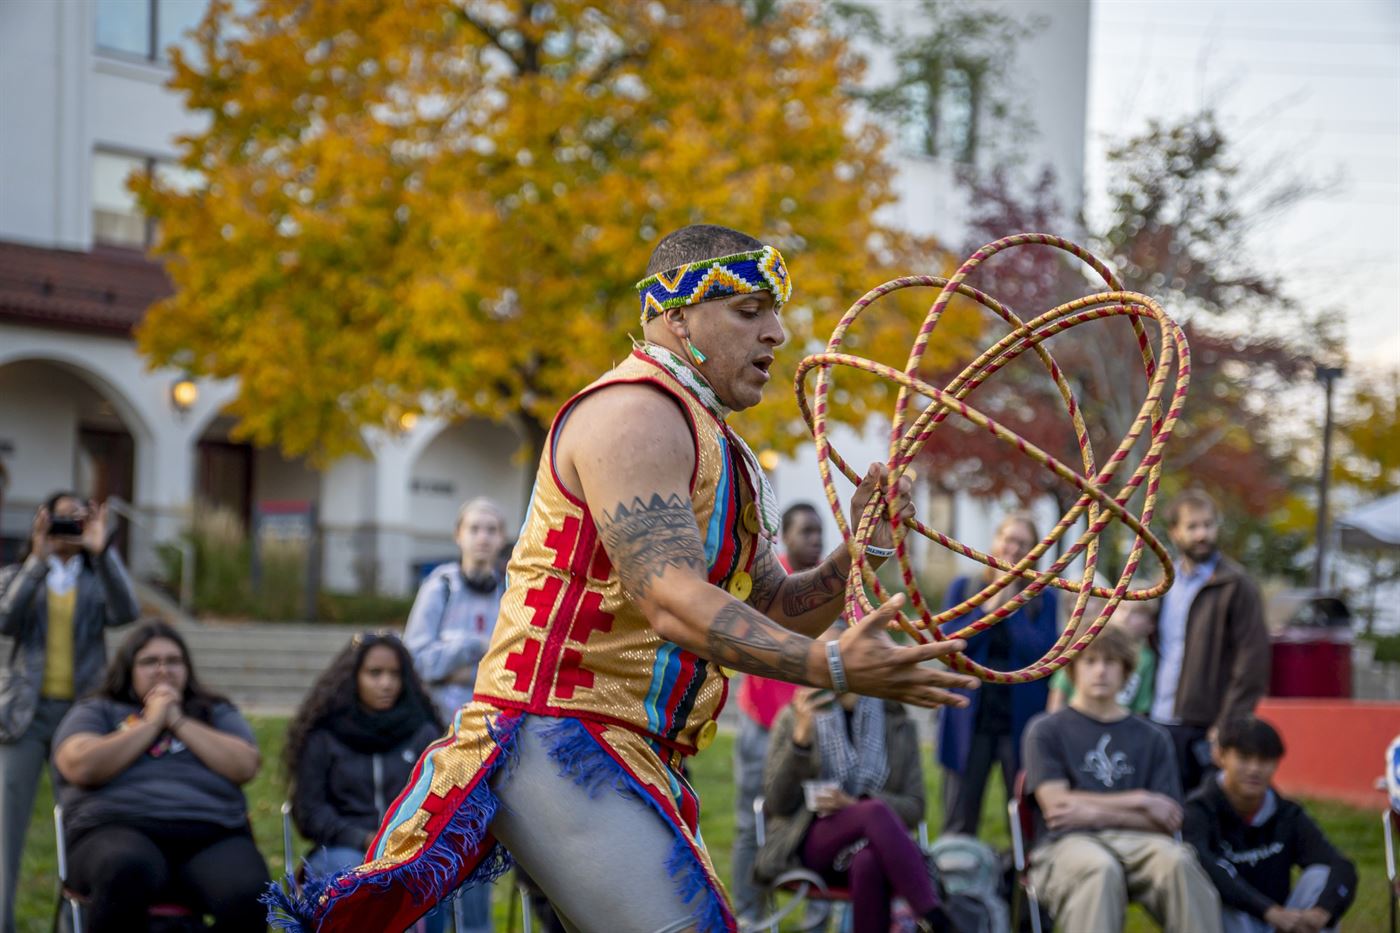 Duncan Munson performs a Native American hoop dance. Lynise Olivacce | The Montclarion